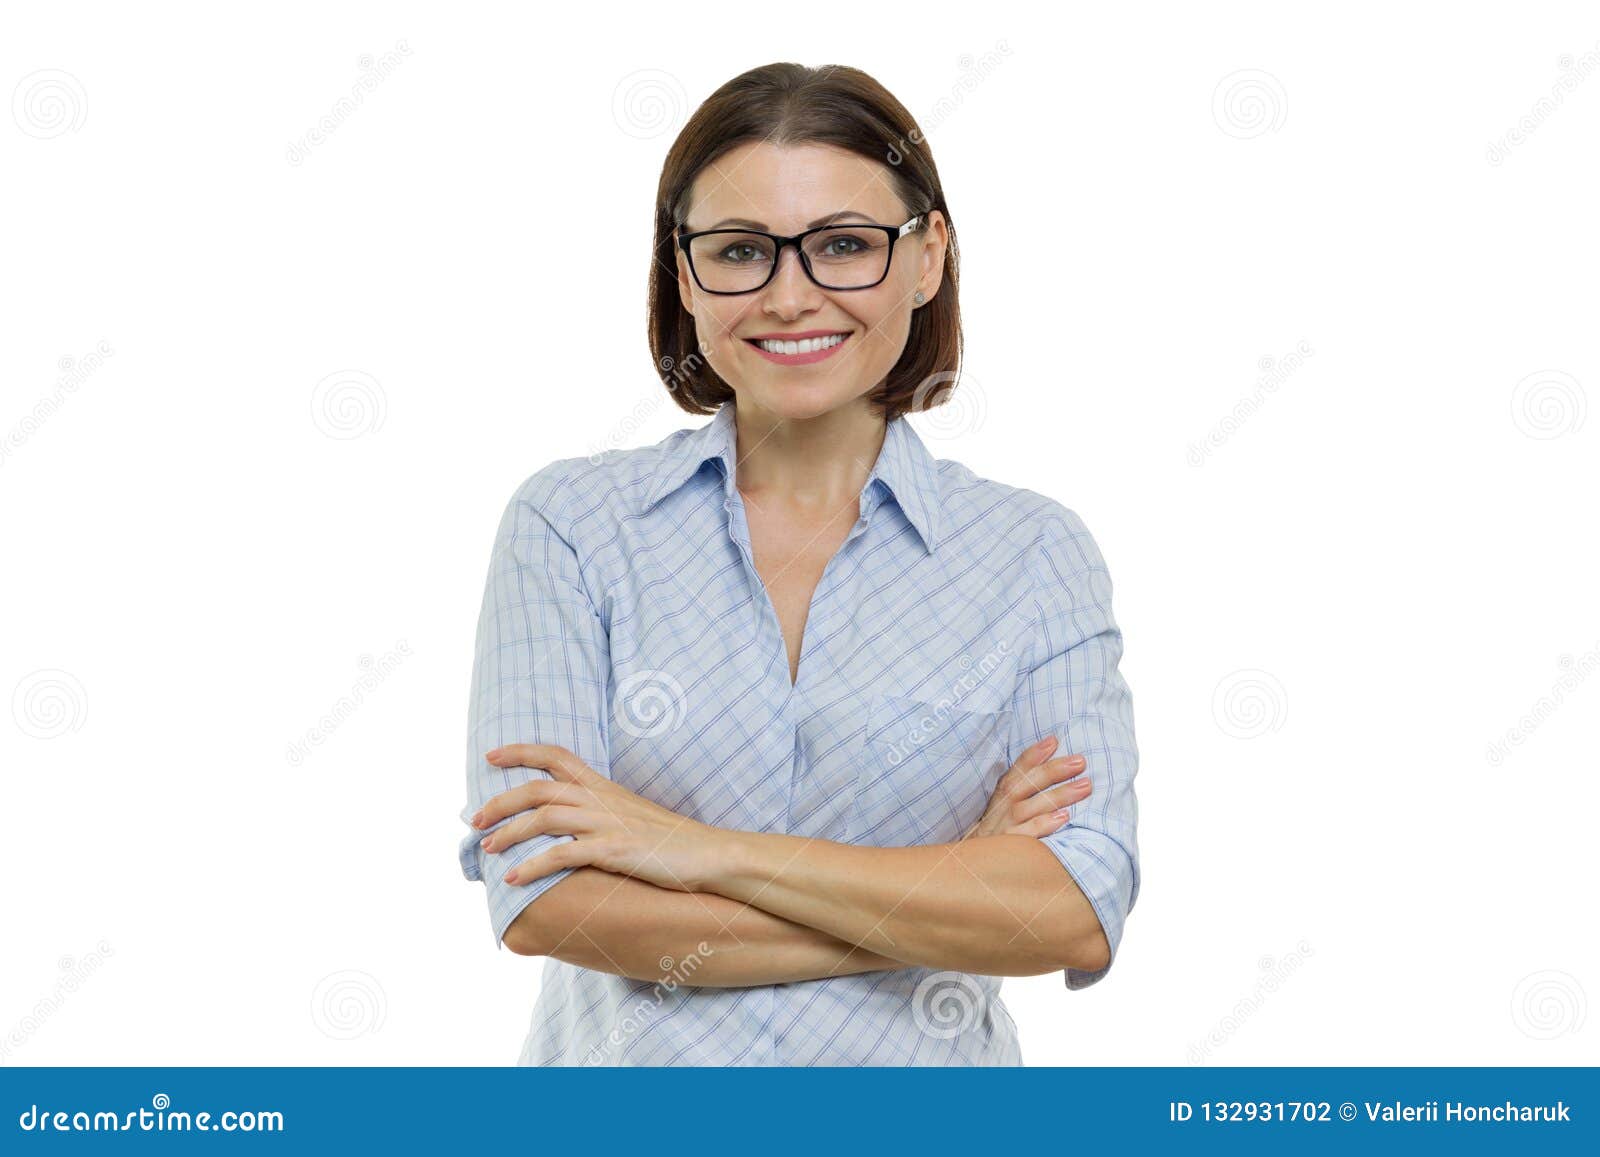 positive mature woman on white  background. confident female smiling arms crossed, businesswomen, specialist, expert